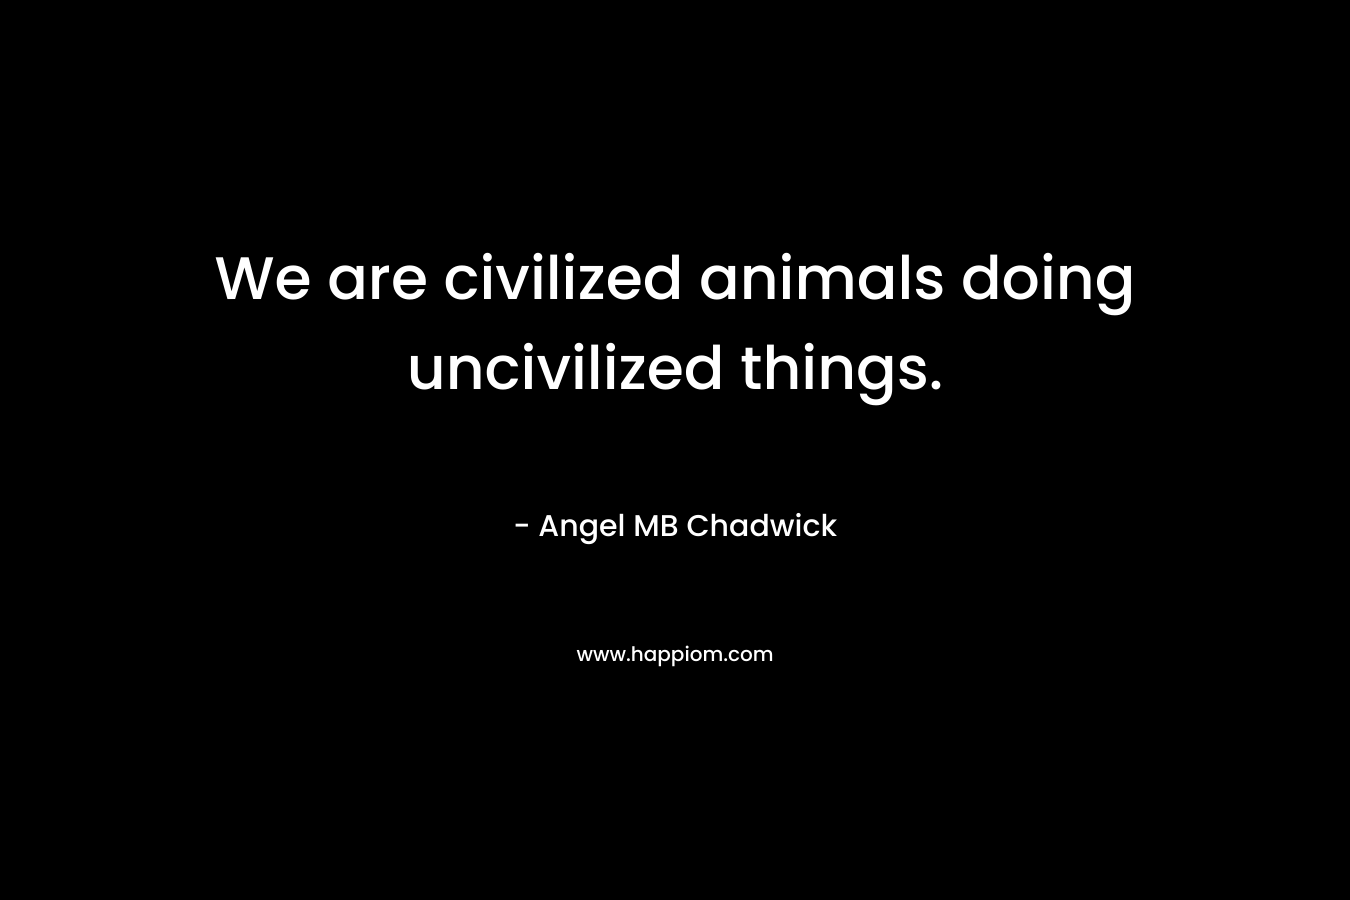 We are civilized animals doing uncivilized things. – Angel MB Chadwick